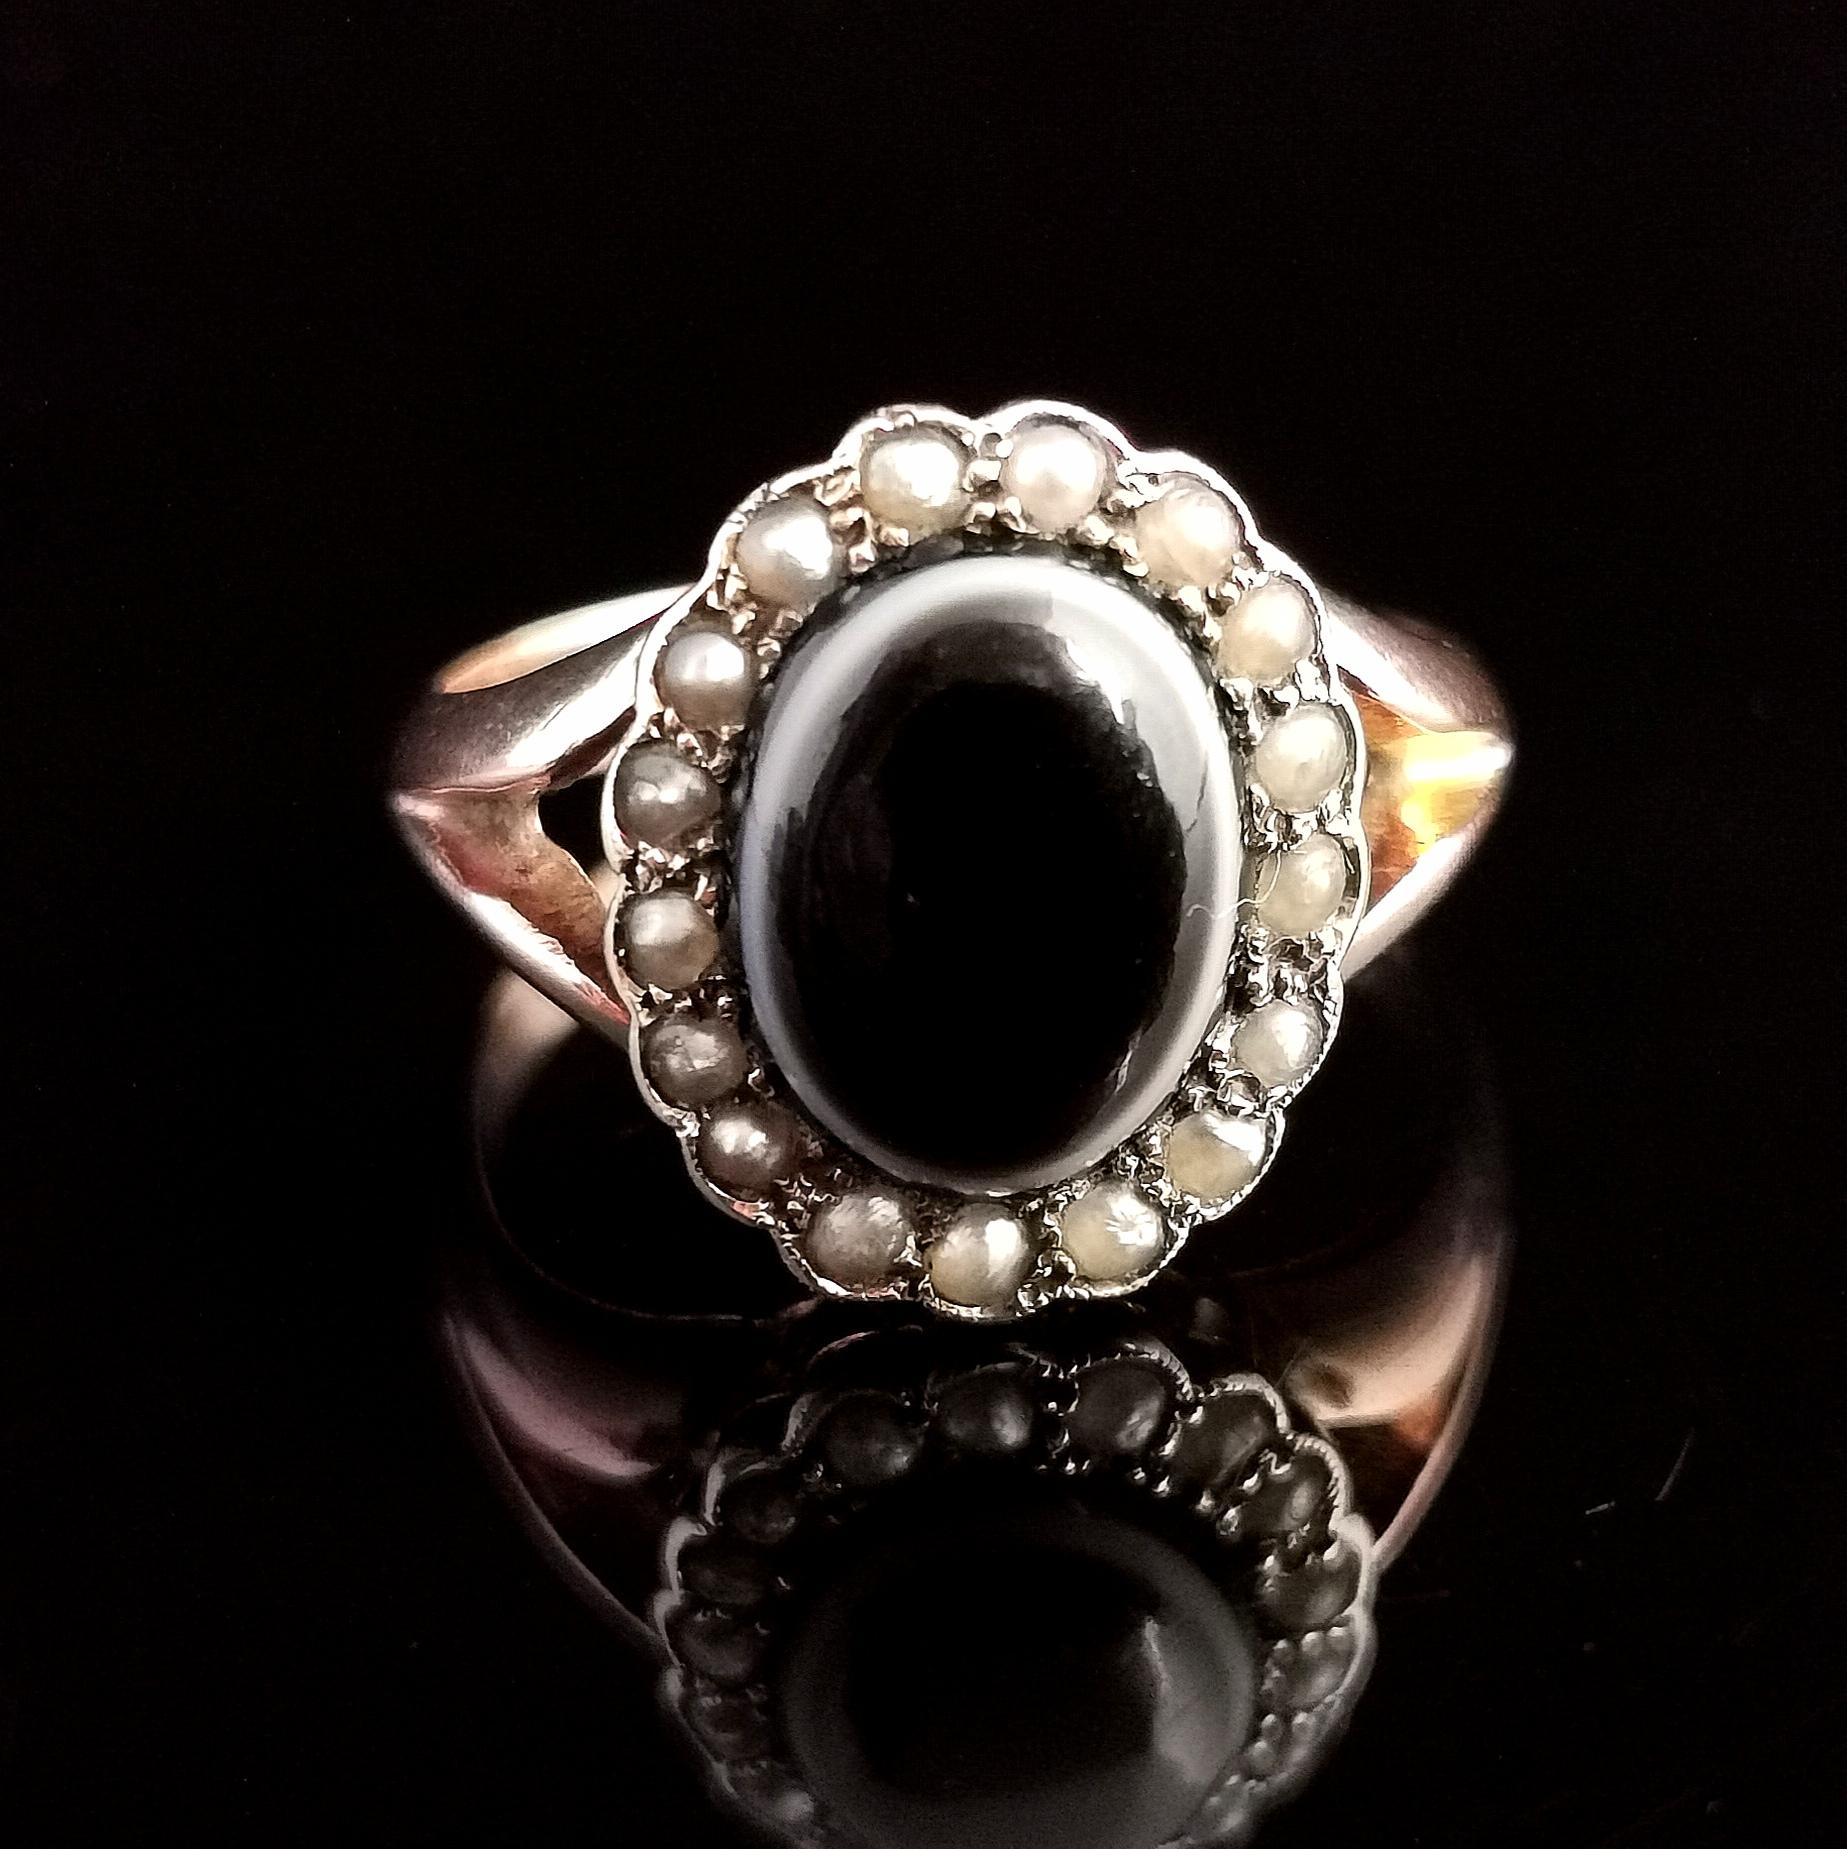 Cabochon Antique Bullseye Agate Mourning Ring, Seed Pearl, 9 Karat Yellow Gold For Sale